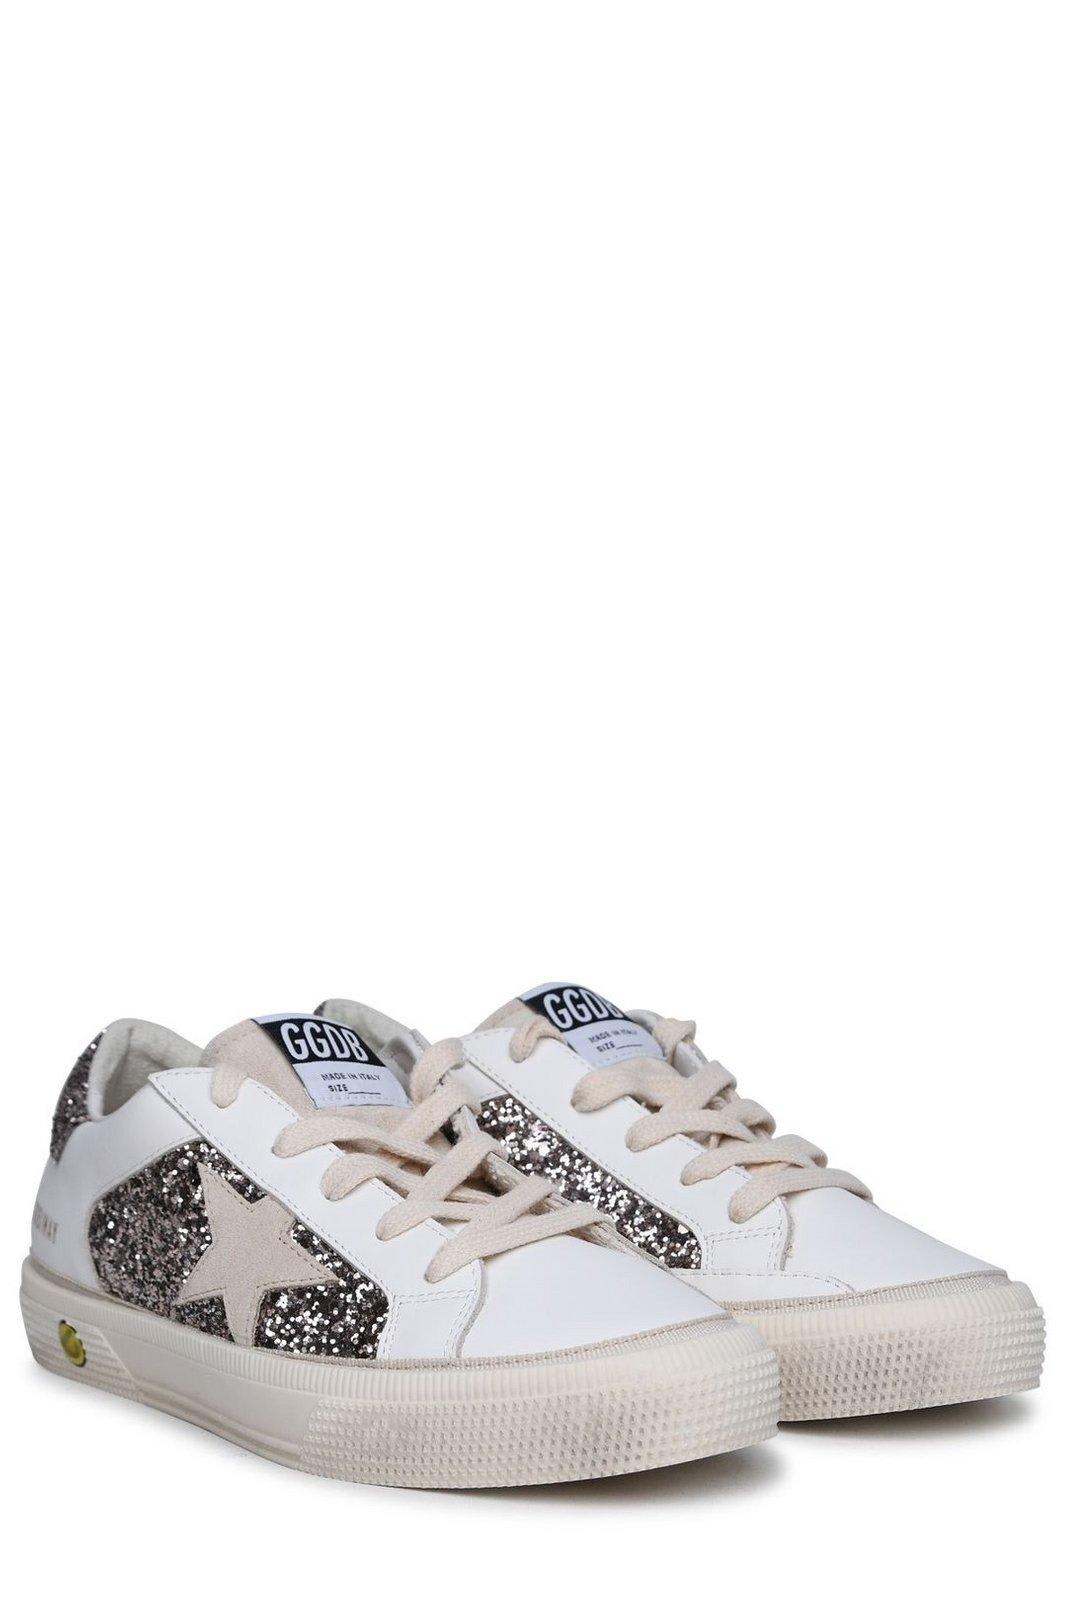 Shop Golden Goose N May Star Glittered Sneakers In Optic White